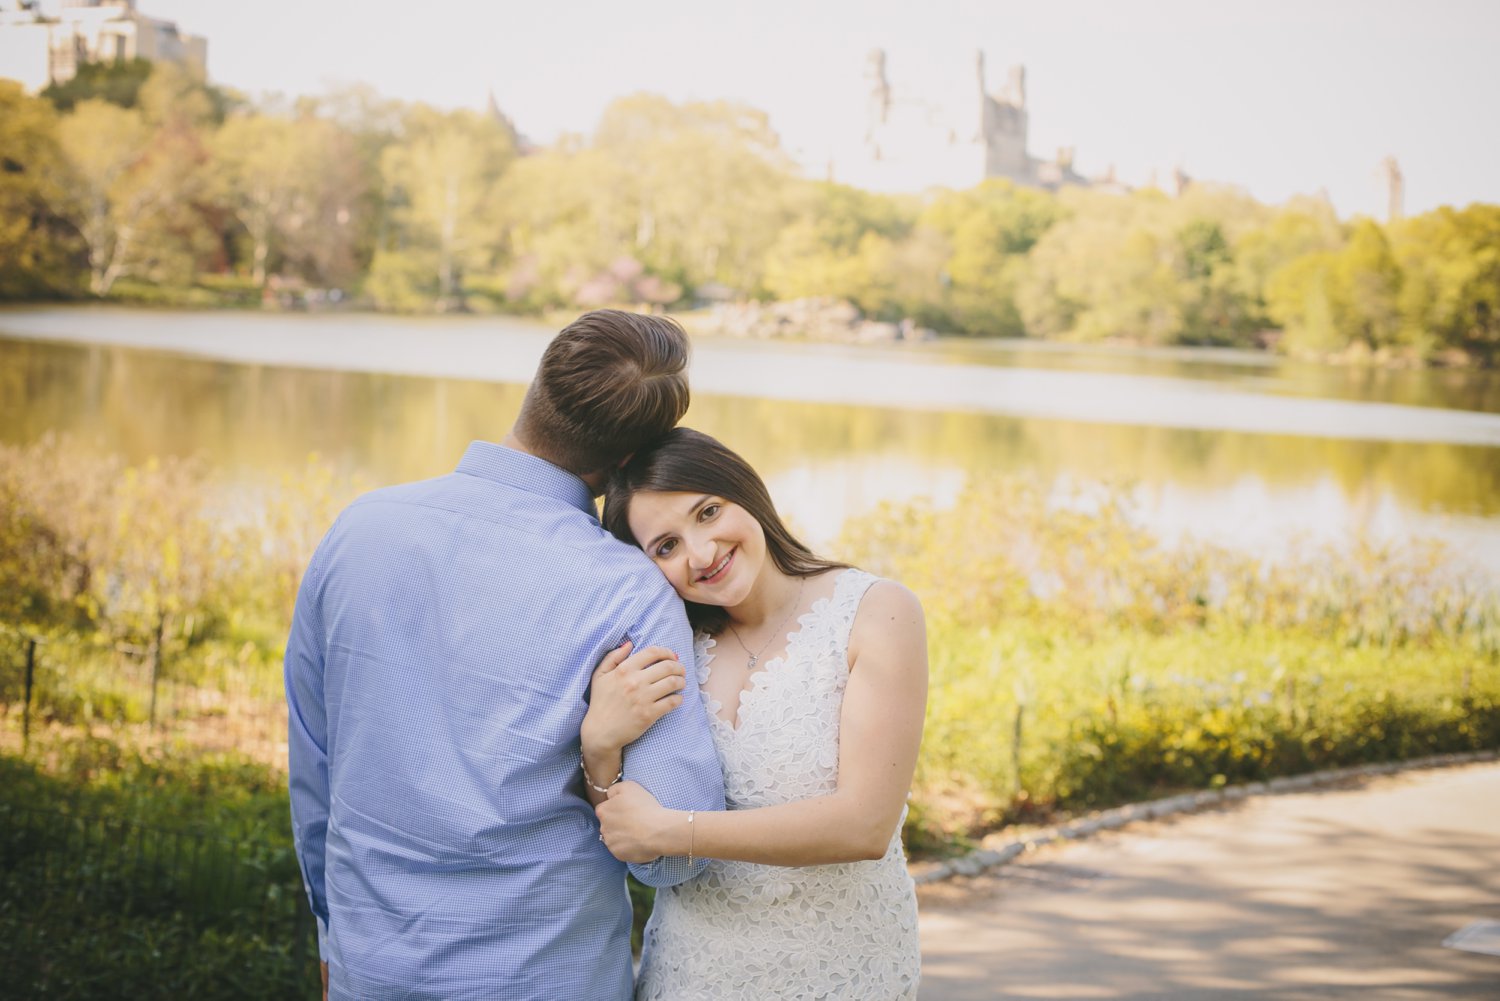 48NYC-NJ-ENGAGEMENT-PHOTOGRAPHY-BY-INTOTHESTORY-MOO-JAE.JPG